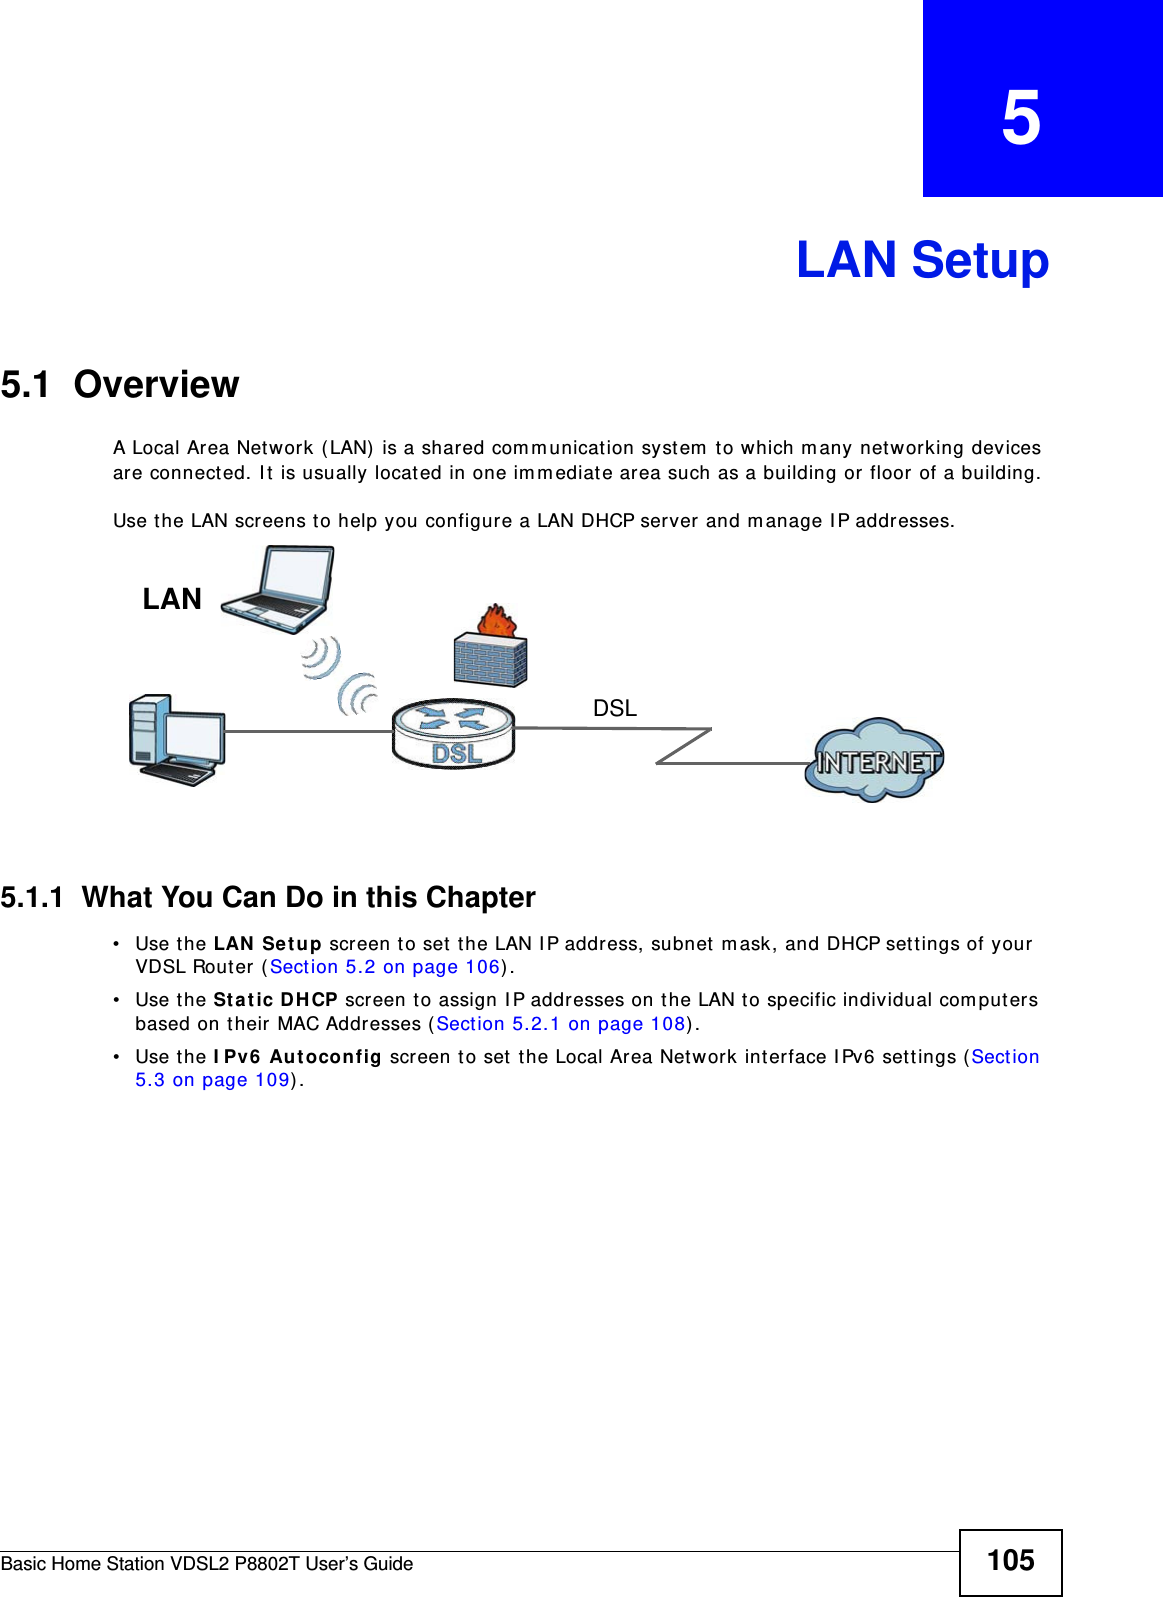 Basic Home Station VDSL2 P8802T User’s Guide 105CHAPTER   5LAN Setup5.1  OverviewA Local Area Network (LAN)  is a shared com m unication syst em  t o which m any networking devices are connect ed. I t is usually locat ed in one im m ediat e area such as a building or floor of a building.Use t he LAN screens to help you configure a LAN DHCP server and m anage I P addresses.5.1.1  What You Can Do in this Chapter• Use the LAN Set up scr een t o set t he LAN I P address, subnet  m ask, and DHCP sett ings of your VDSL Rout er  ( Sect ion 5.2 on page 106) .• Use the St a t ic DHCP screen t o assign I P addresses on t he LAN t o specific individual com puters based on their MAC Addresses (Sect ion 5.2.1 on page 108). • Use the I Pv6  Aut oconfig screen t o set  t he Local Area Network int erface I Pv6 sett ings (Section 5.3 on page 109) .DSLLAN